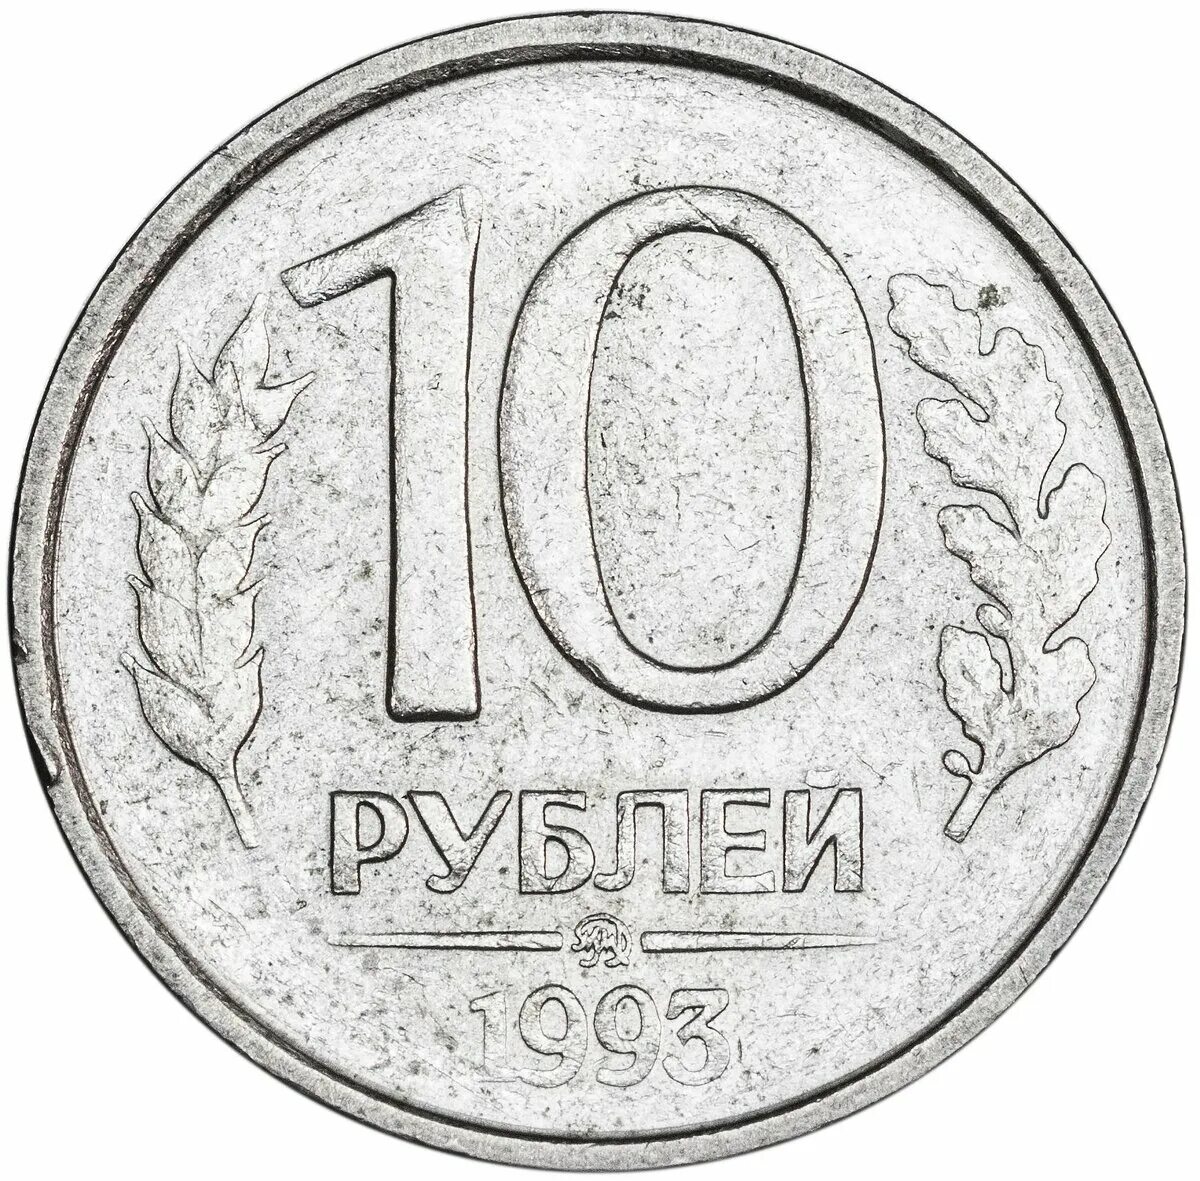 10 ruble coin #5